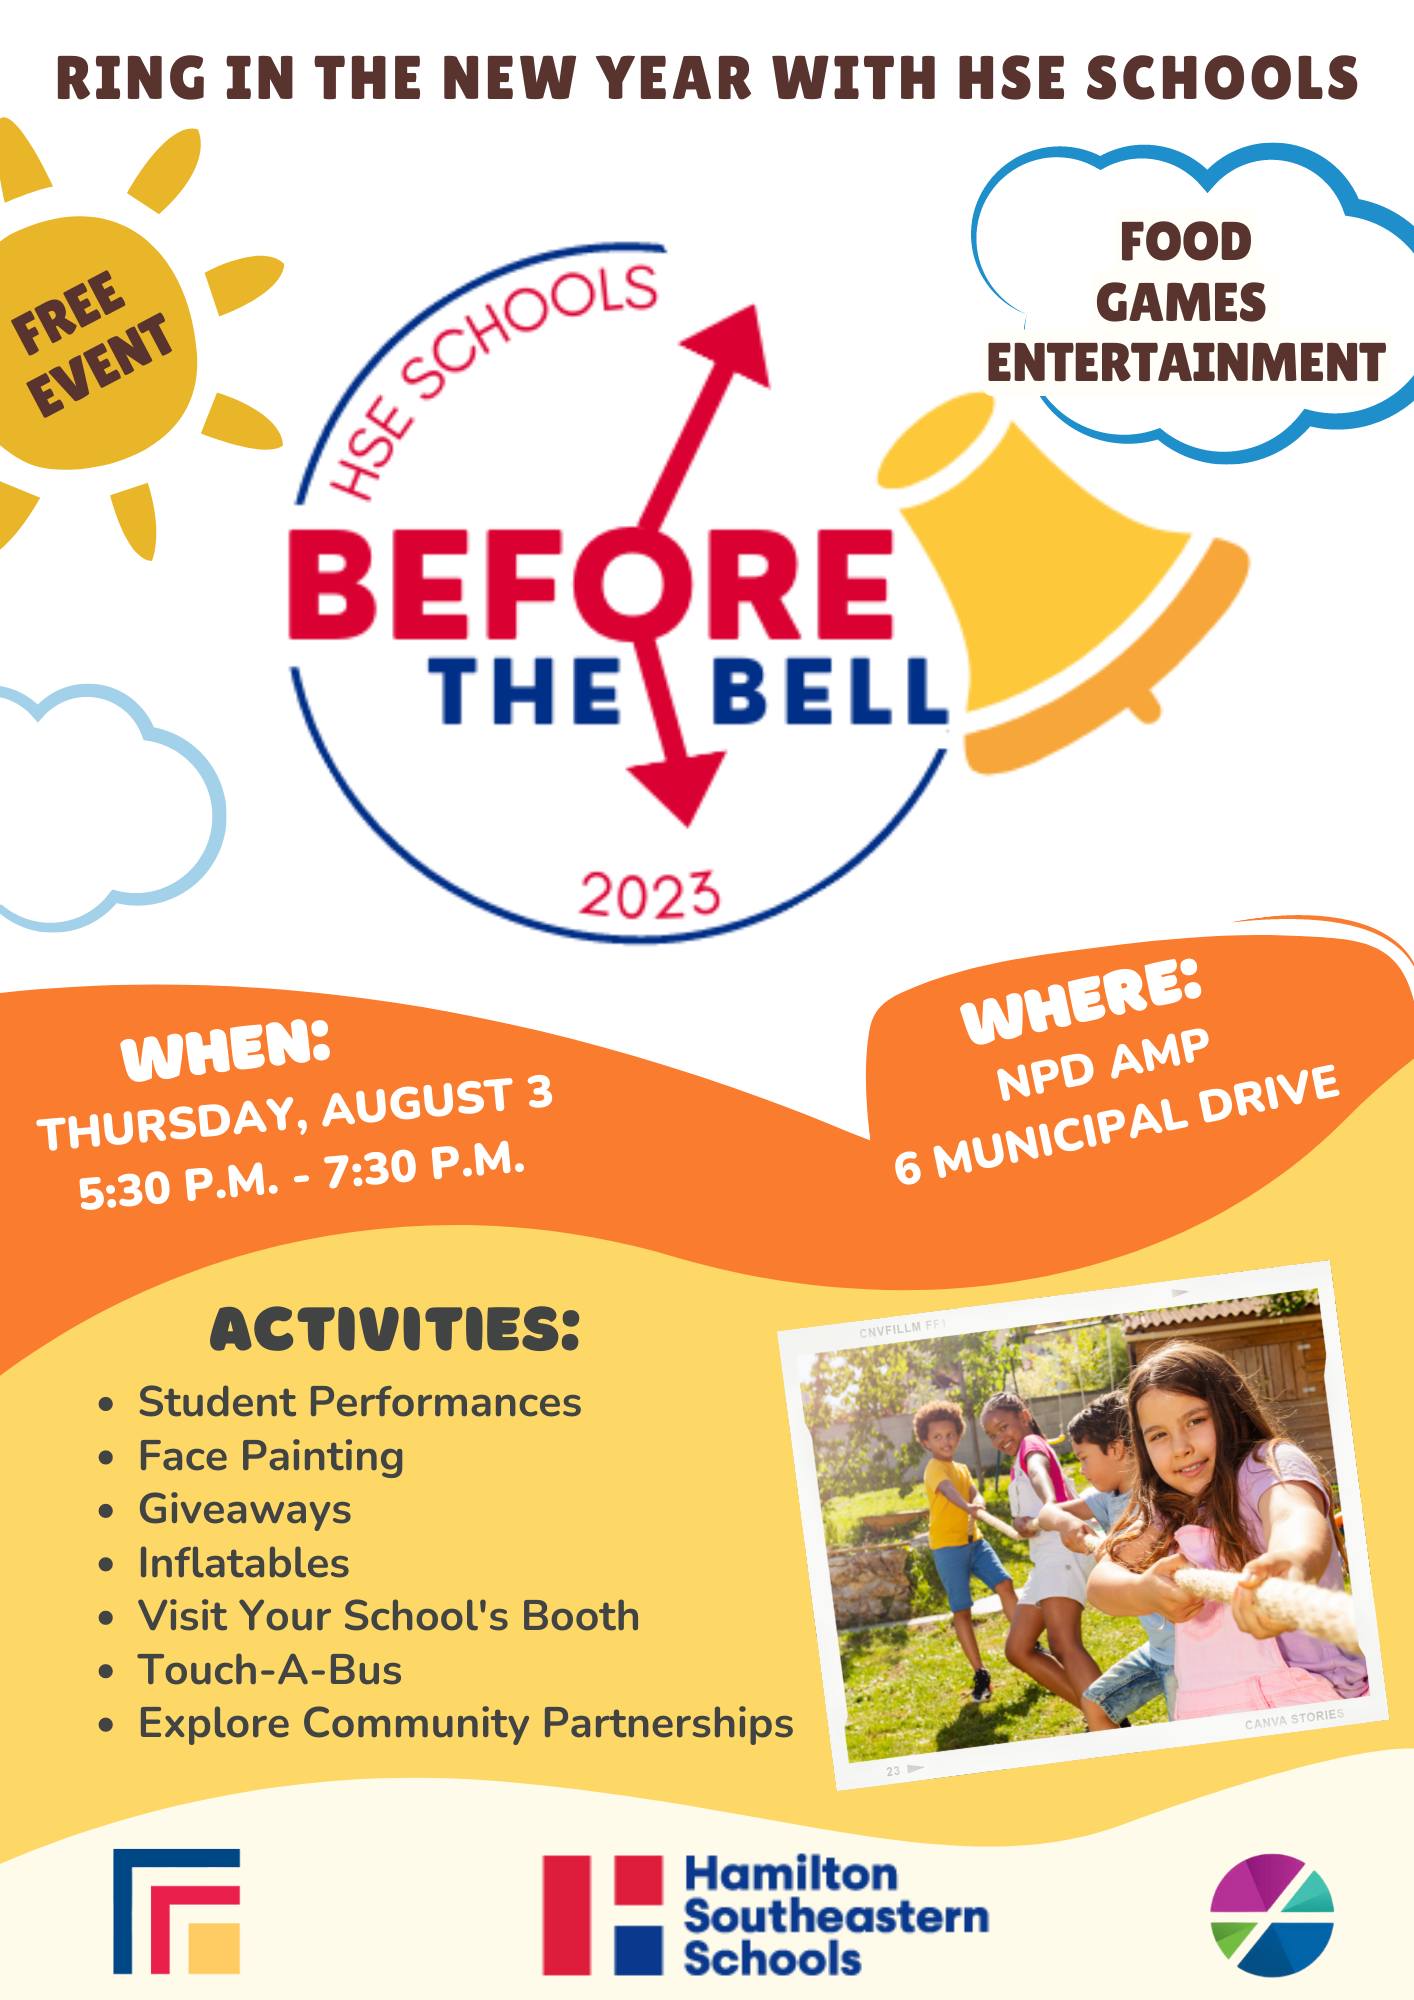 Ring in the New Year with HSE Schools. Free Event. HSE Schools Before the Bell 2023. Food, games, entertainment. When: Thursday, August 3 5:30 p.m. - 7:30 p.m. Where: NPD AMP 6 Municipal Drive Activities: Student performances, face painting, giveaways, inflatables, visit your school's booth, touch-a-bus, explore community partnerships.